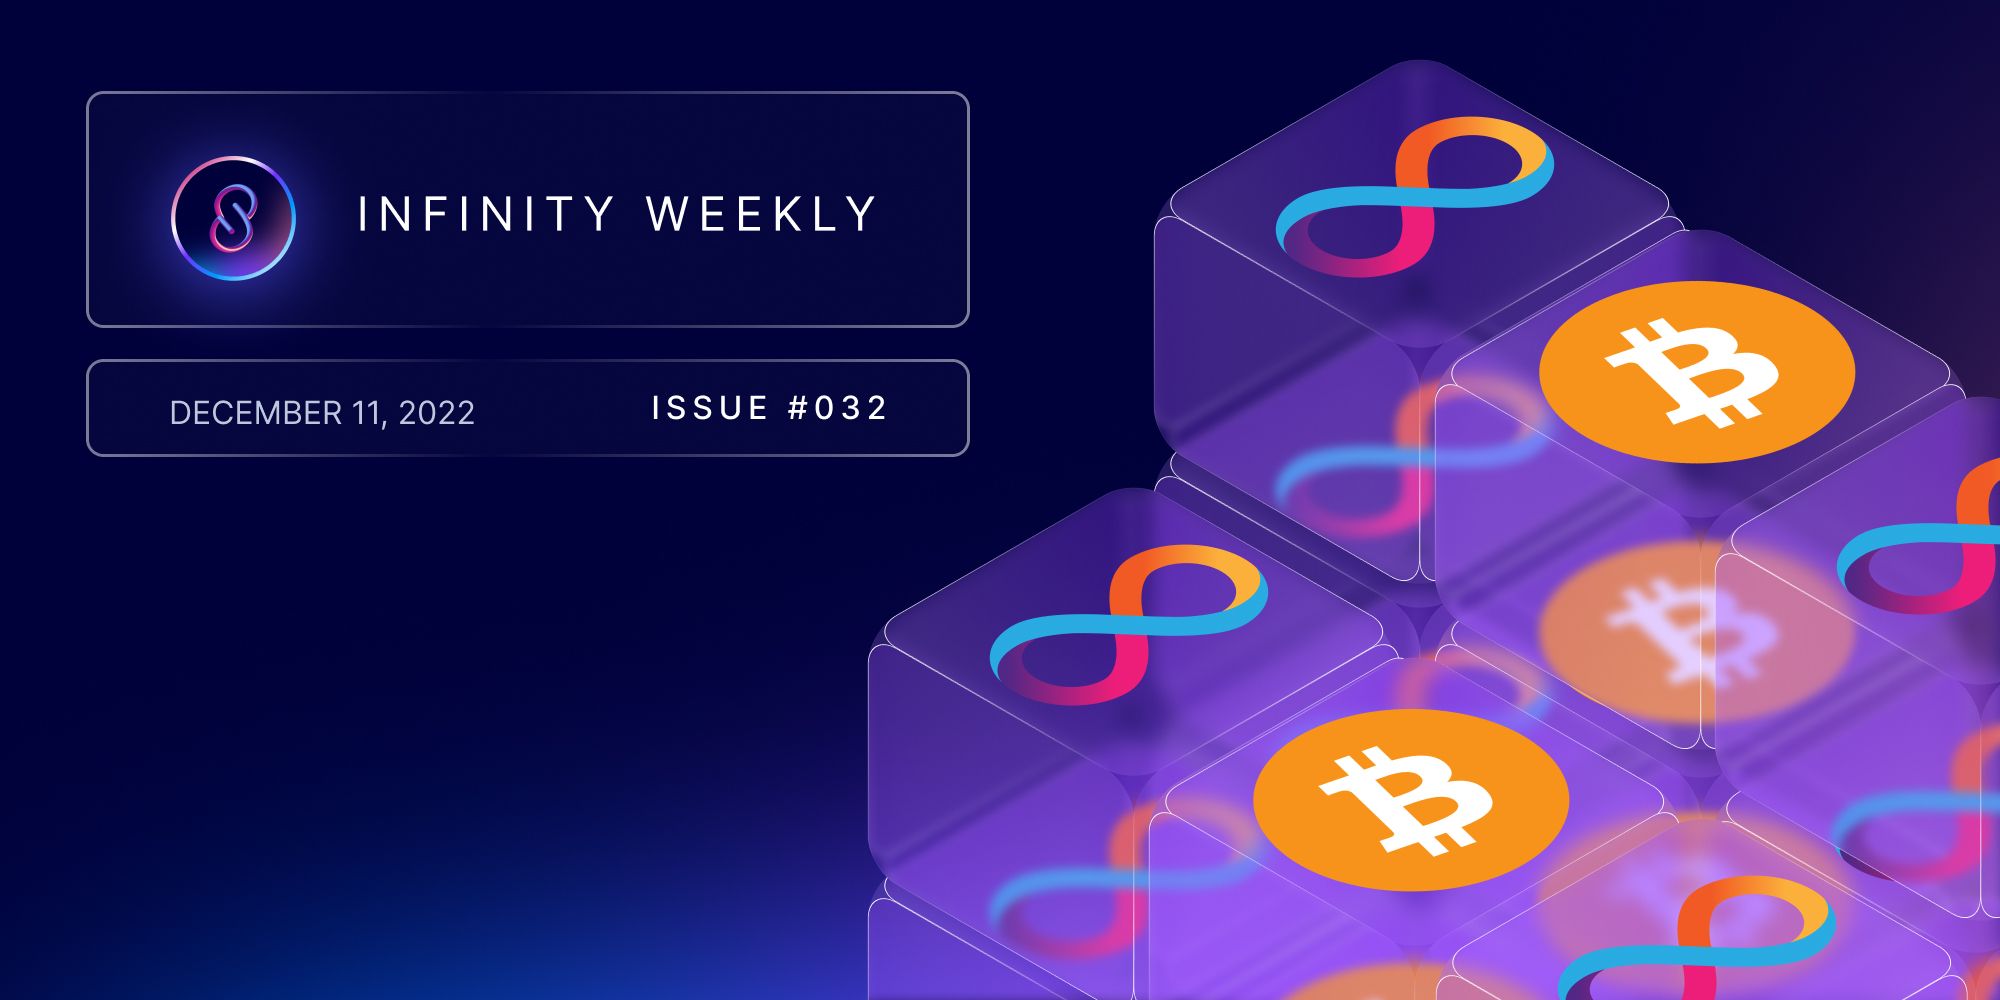 Infinity Weekly: Time to Make the Bitfinity Wallet the Community Wallet